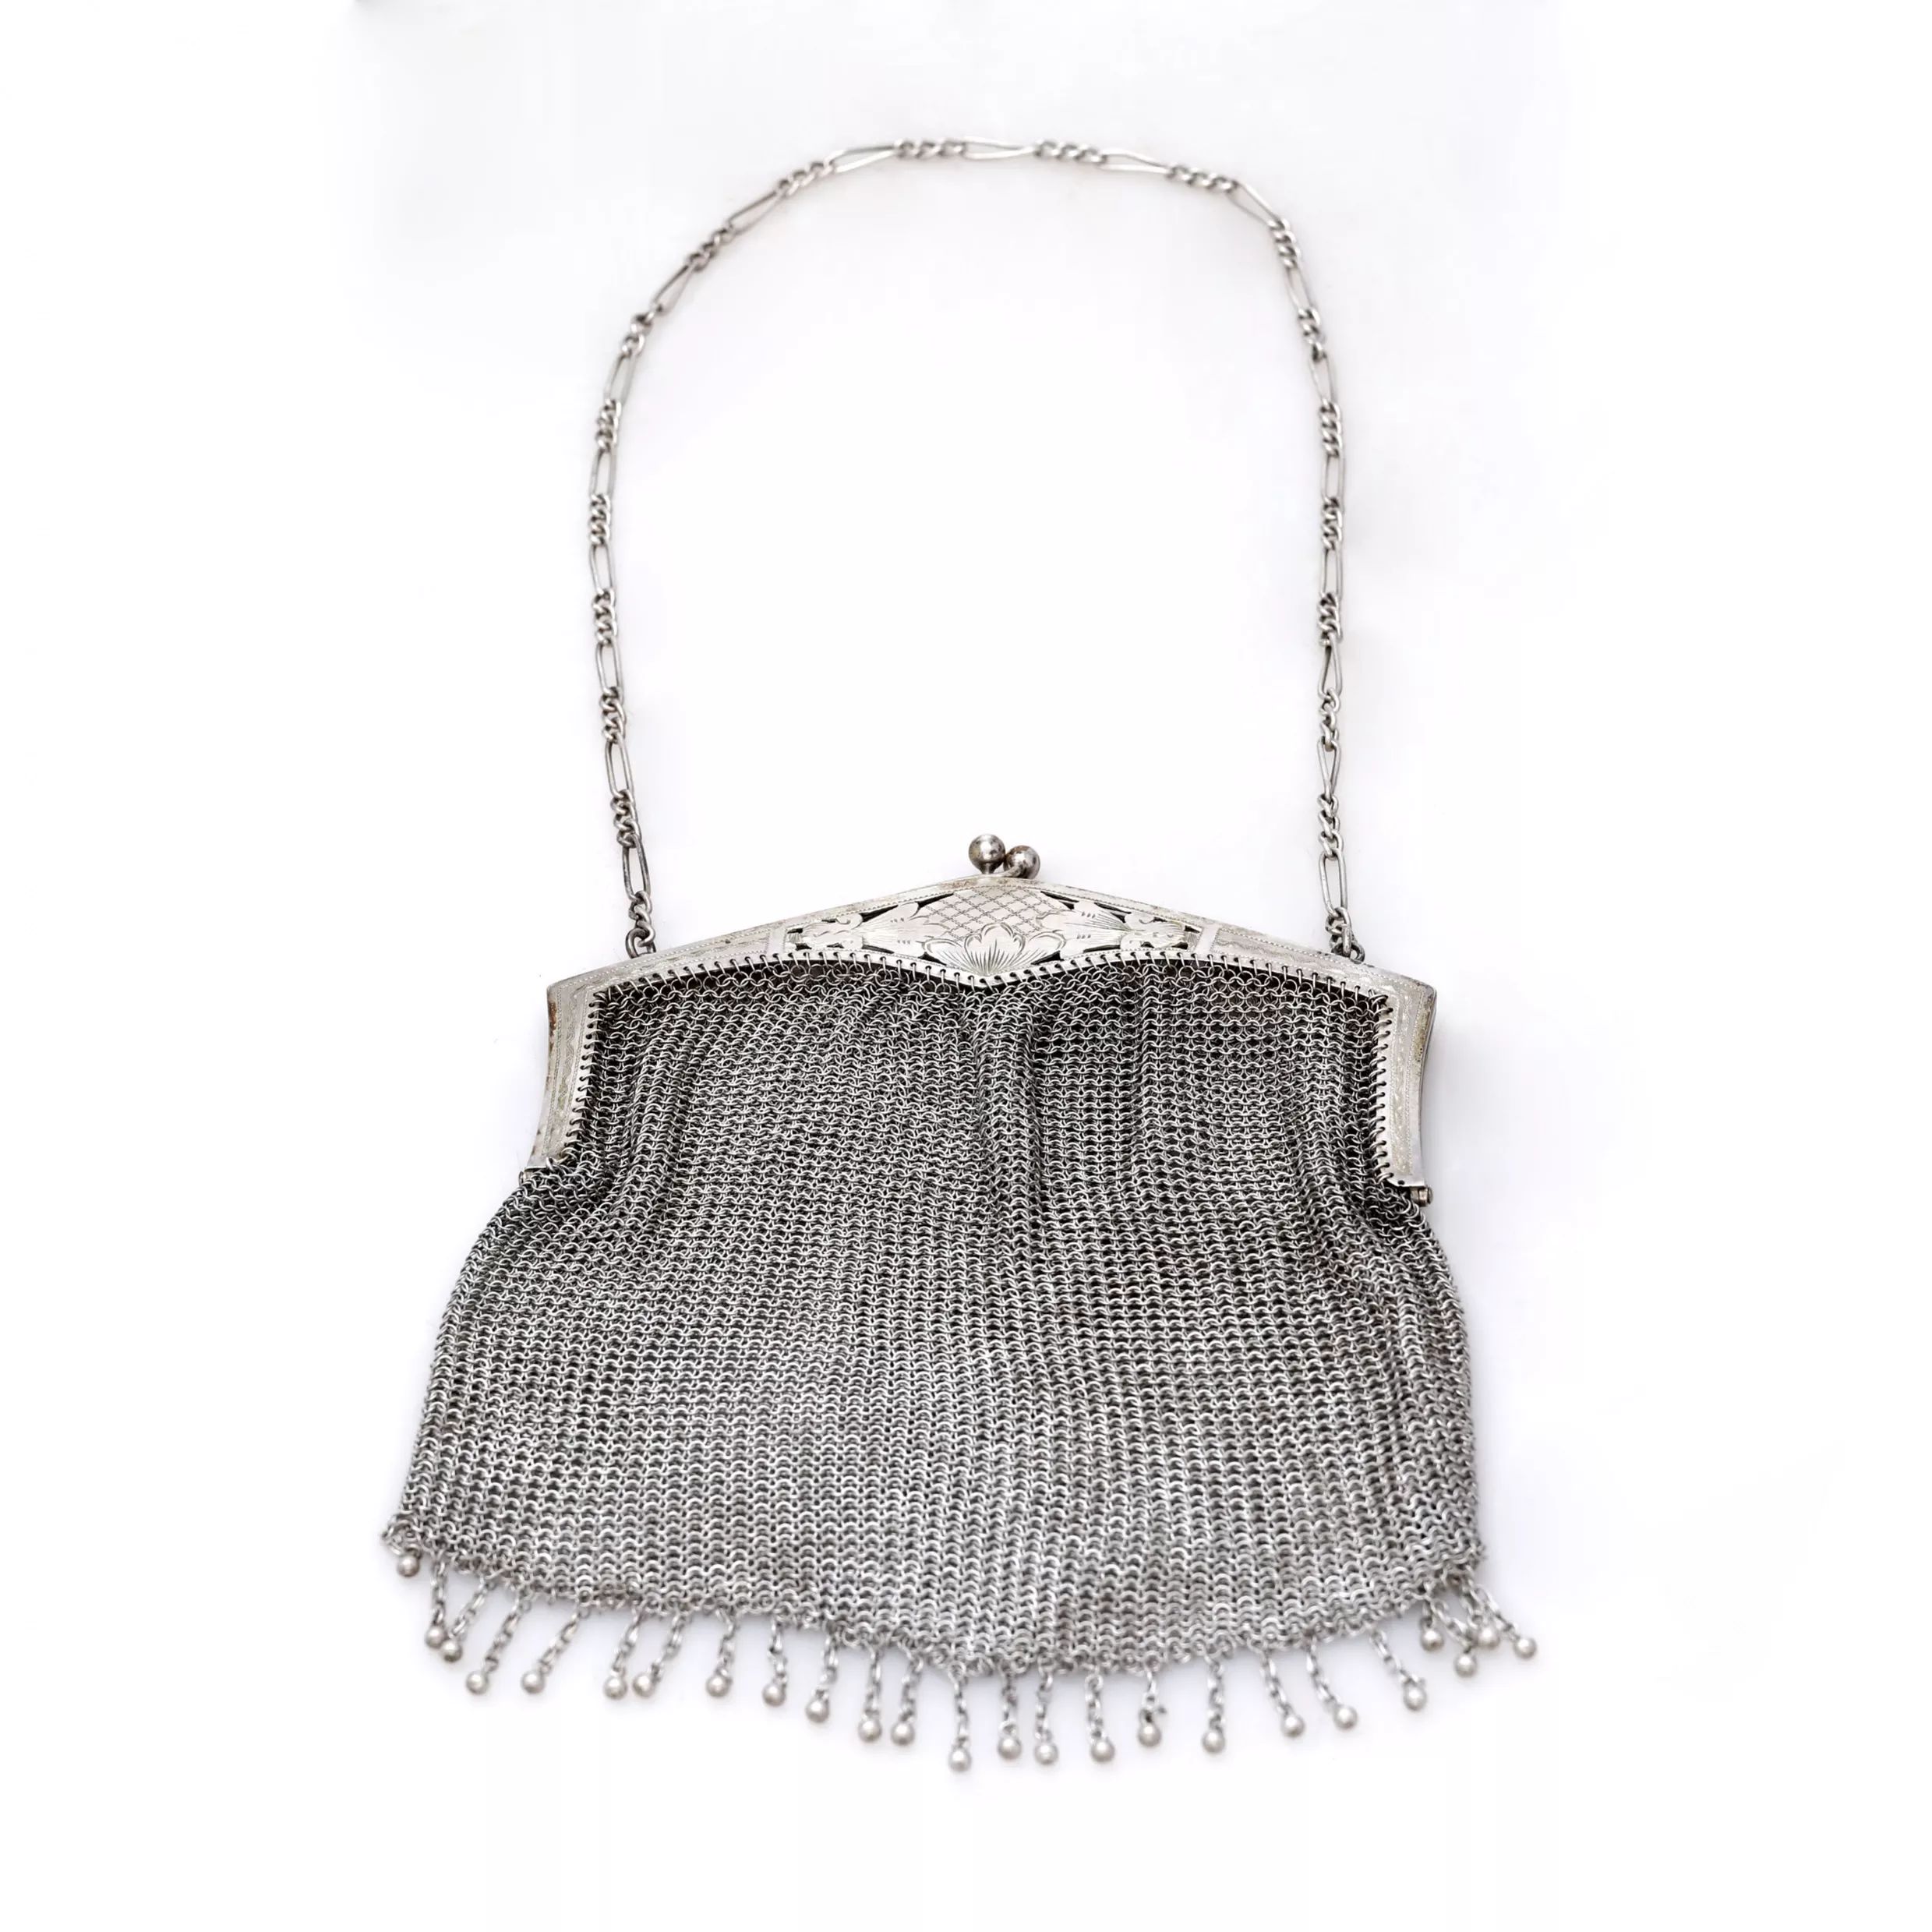 Ladies-silver-theatrical-bag-of-the-Modern-era-